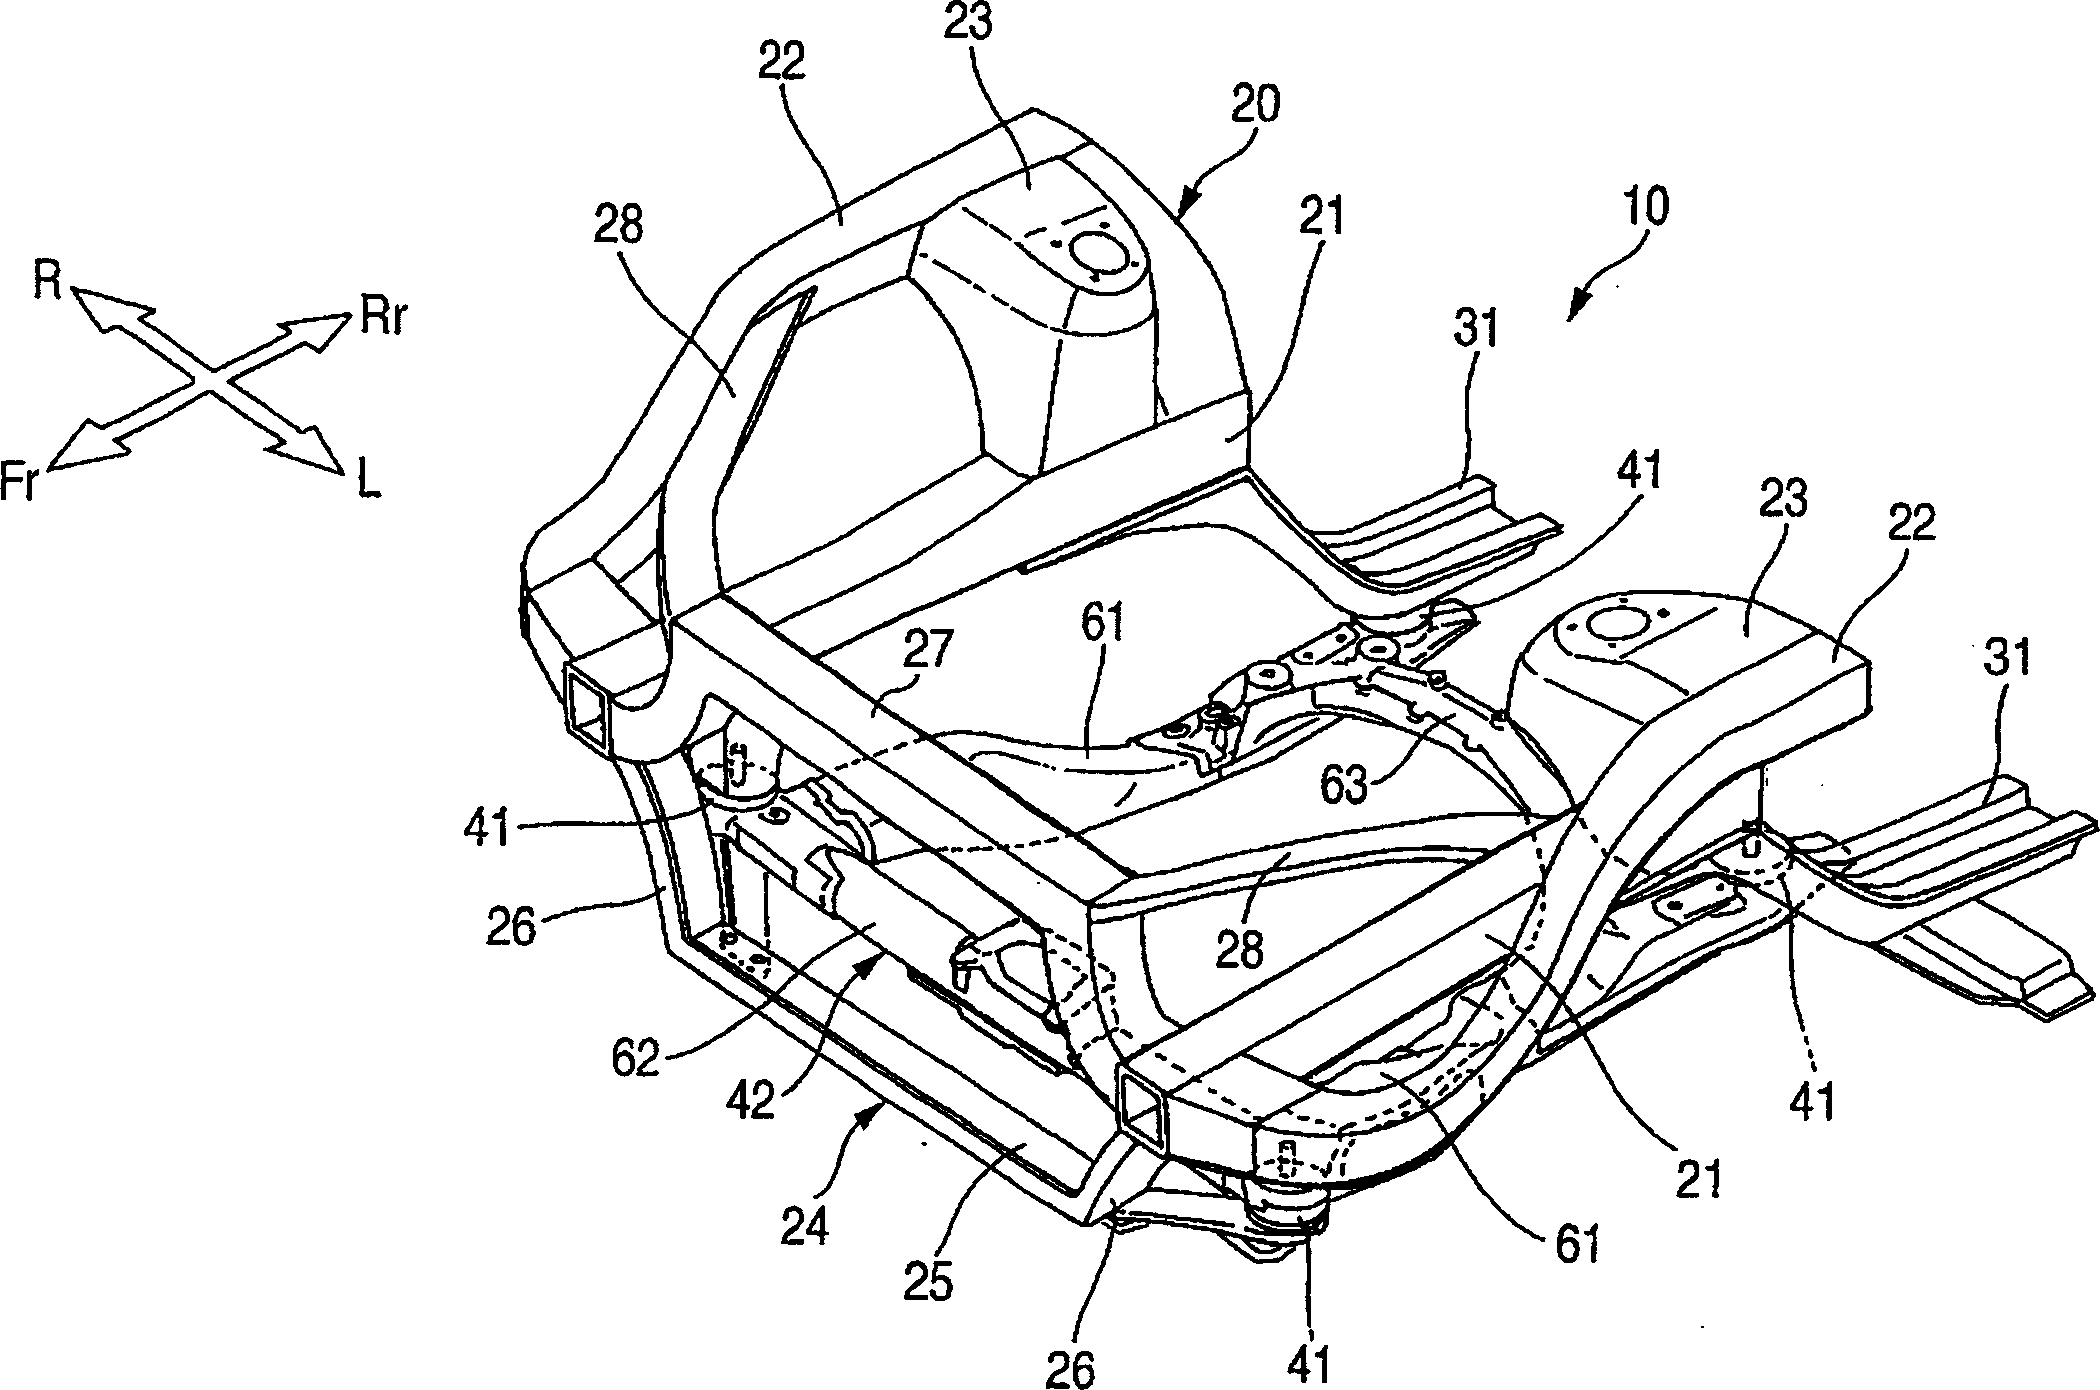 Subframe for vehicle and bush attaching structure